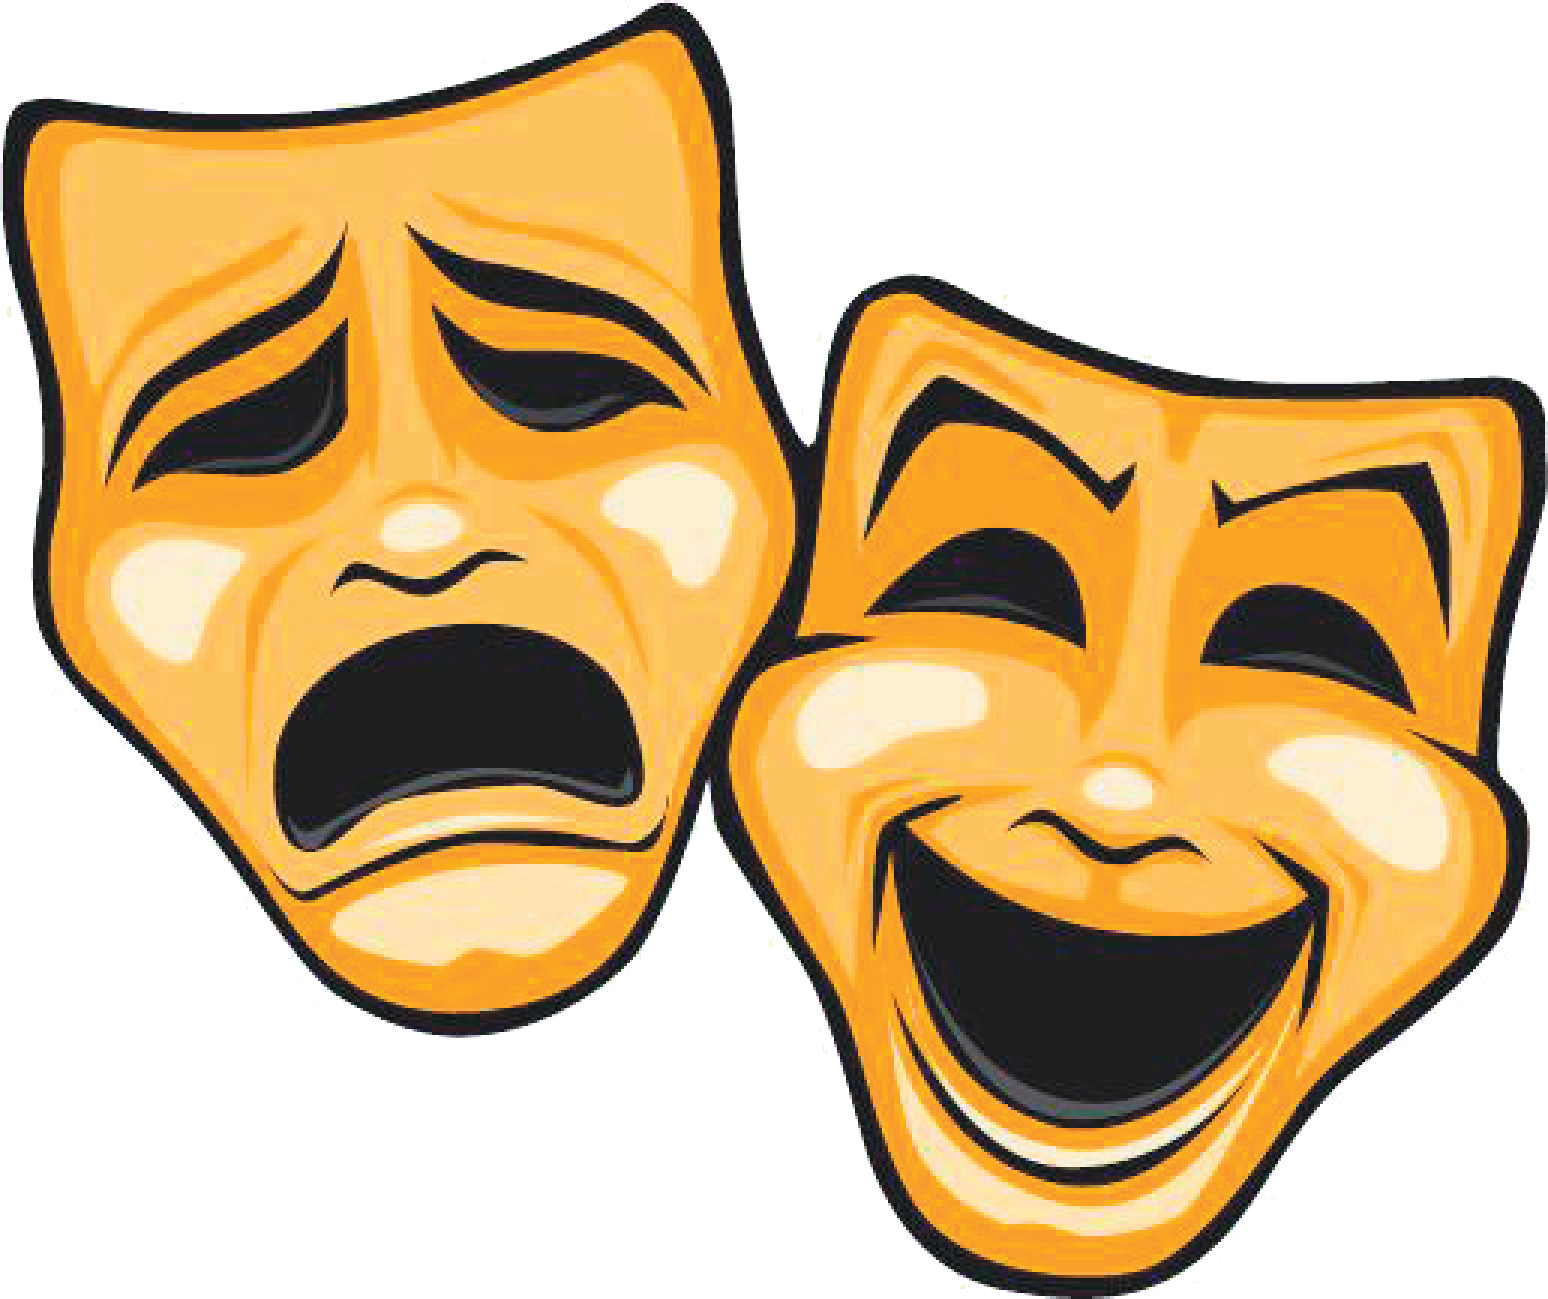 Mask Theatre Tragedy Comedy - Dinner Theatre Cliparts png download